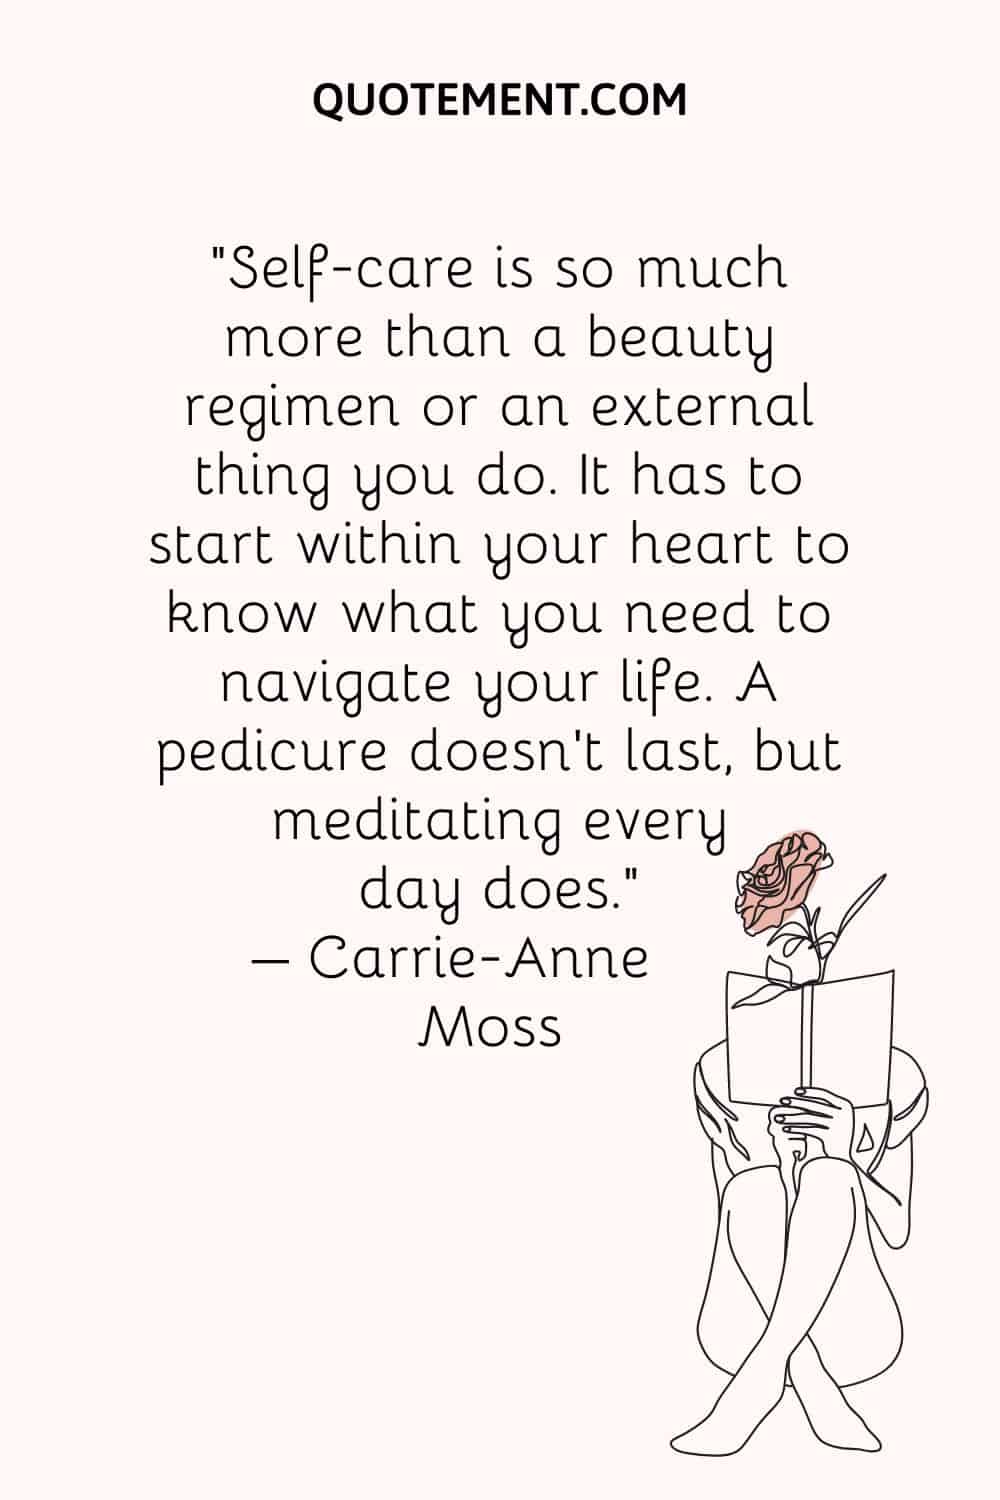 Self-care is so much more than a beauty regimen or an external thing you do